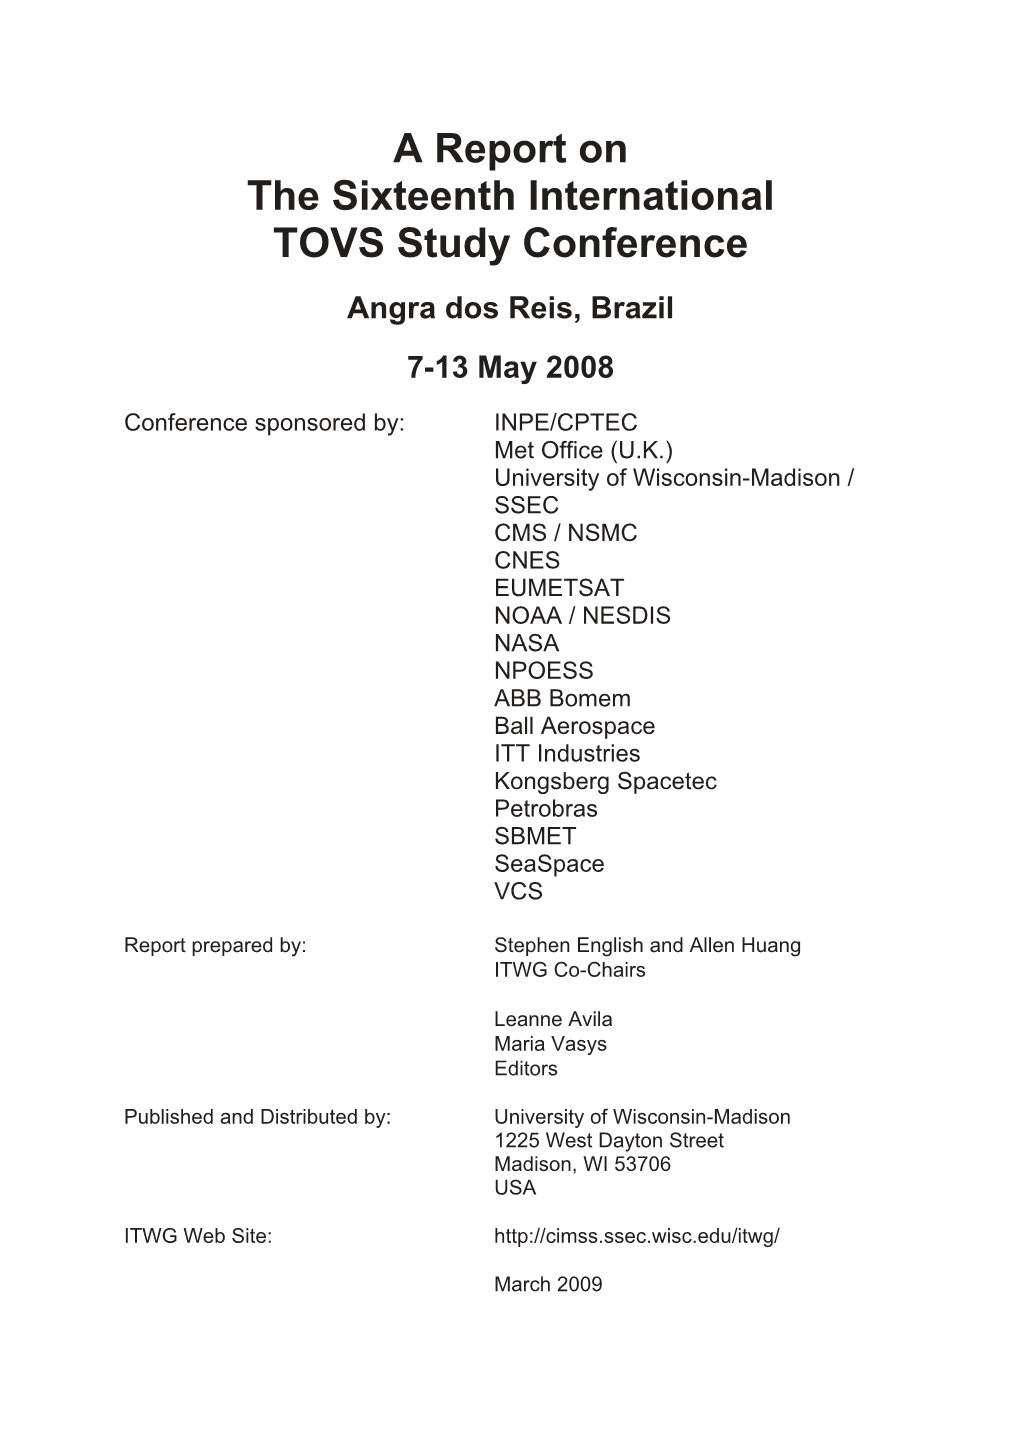 A Report on the Sixteenth International TOVS Study Conference